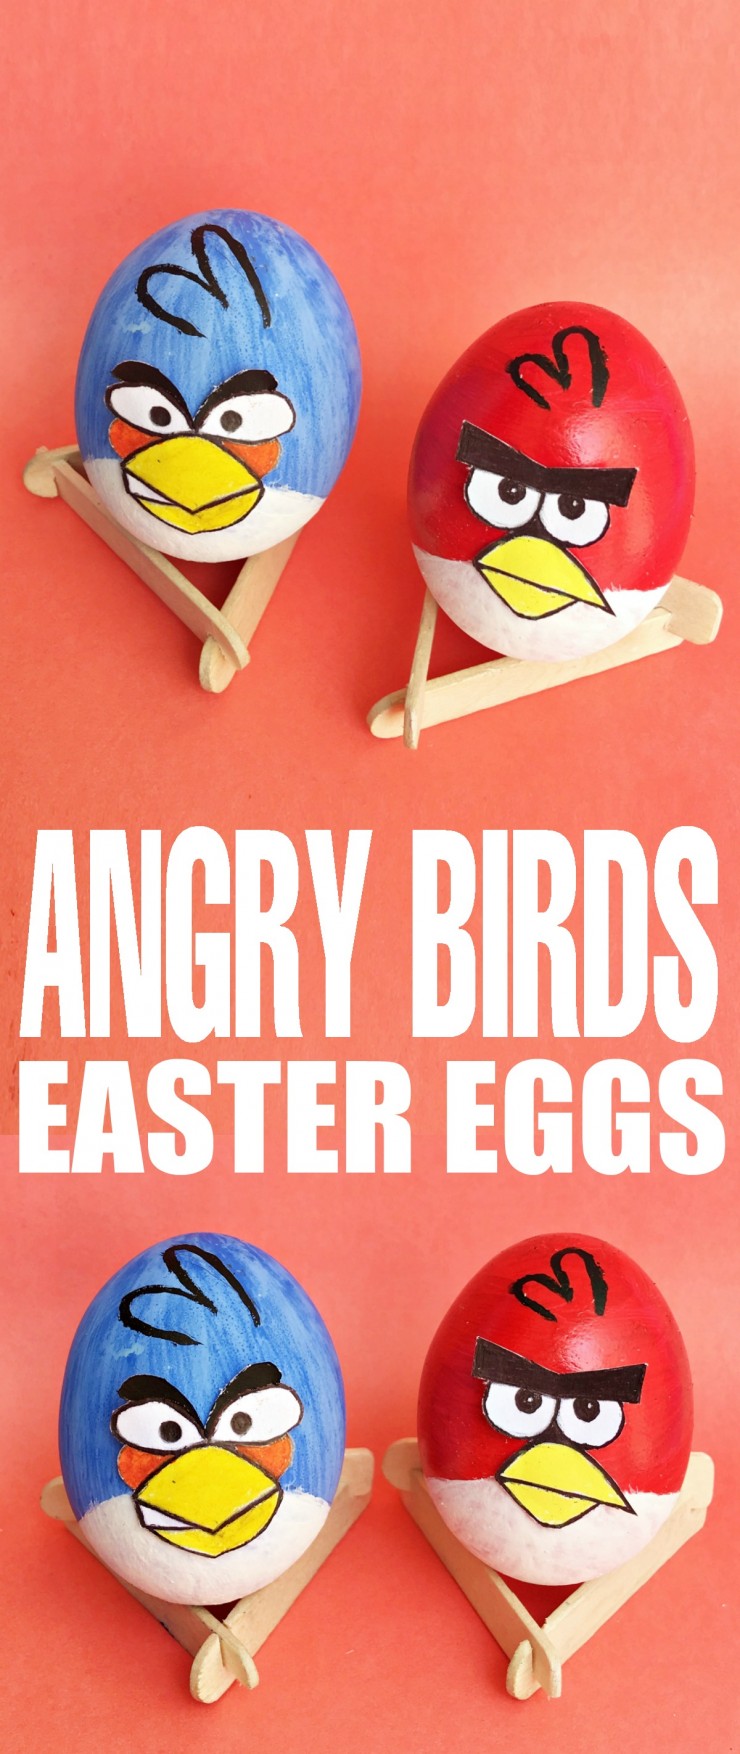 These Angry Birds Easter Eggs are super easy to make and perfect for any Angry Birds fans to make and display this Easter season thanks to the included FREE printable template!